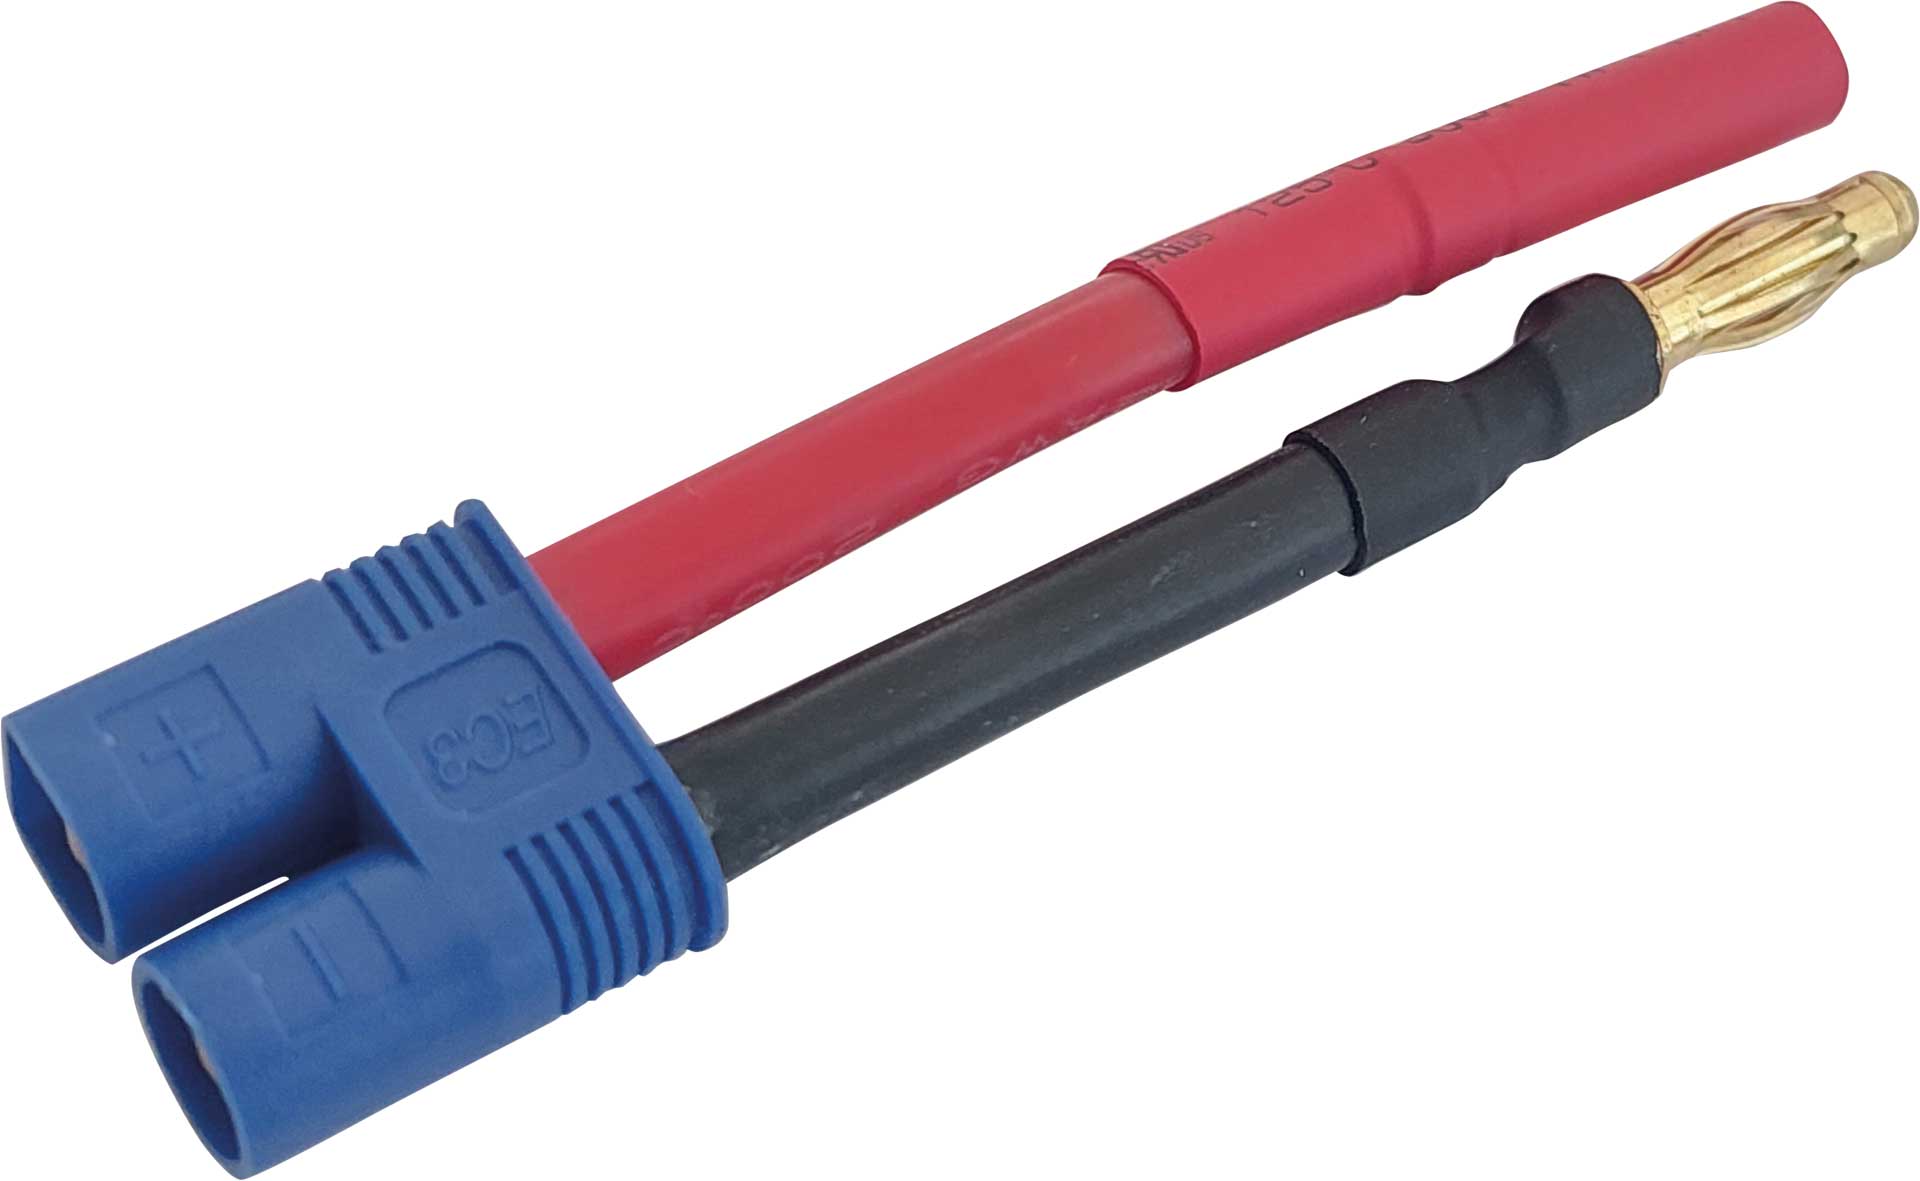 PLANET-HOBBY Adapter cable EC-3 plug to 4mm Gold contact (socket = red) 1pc.